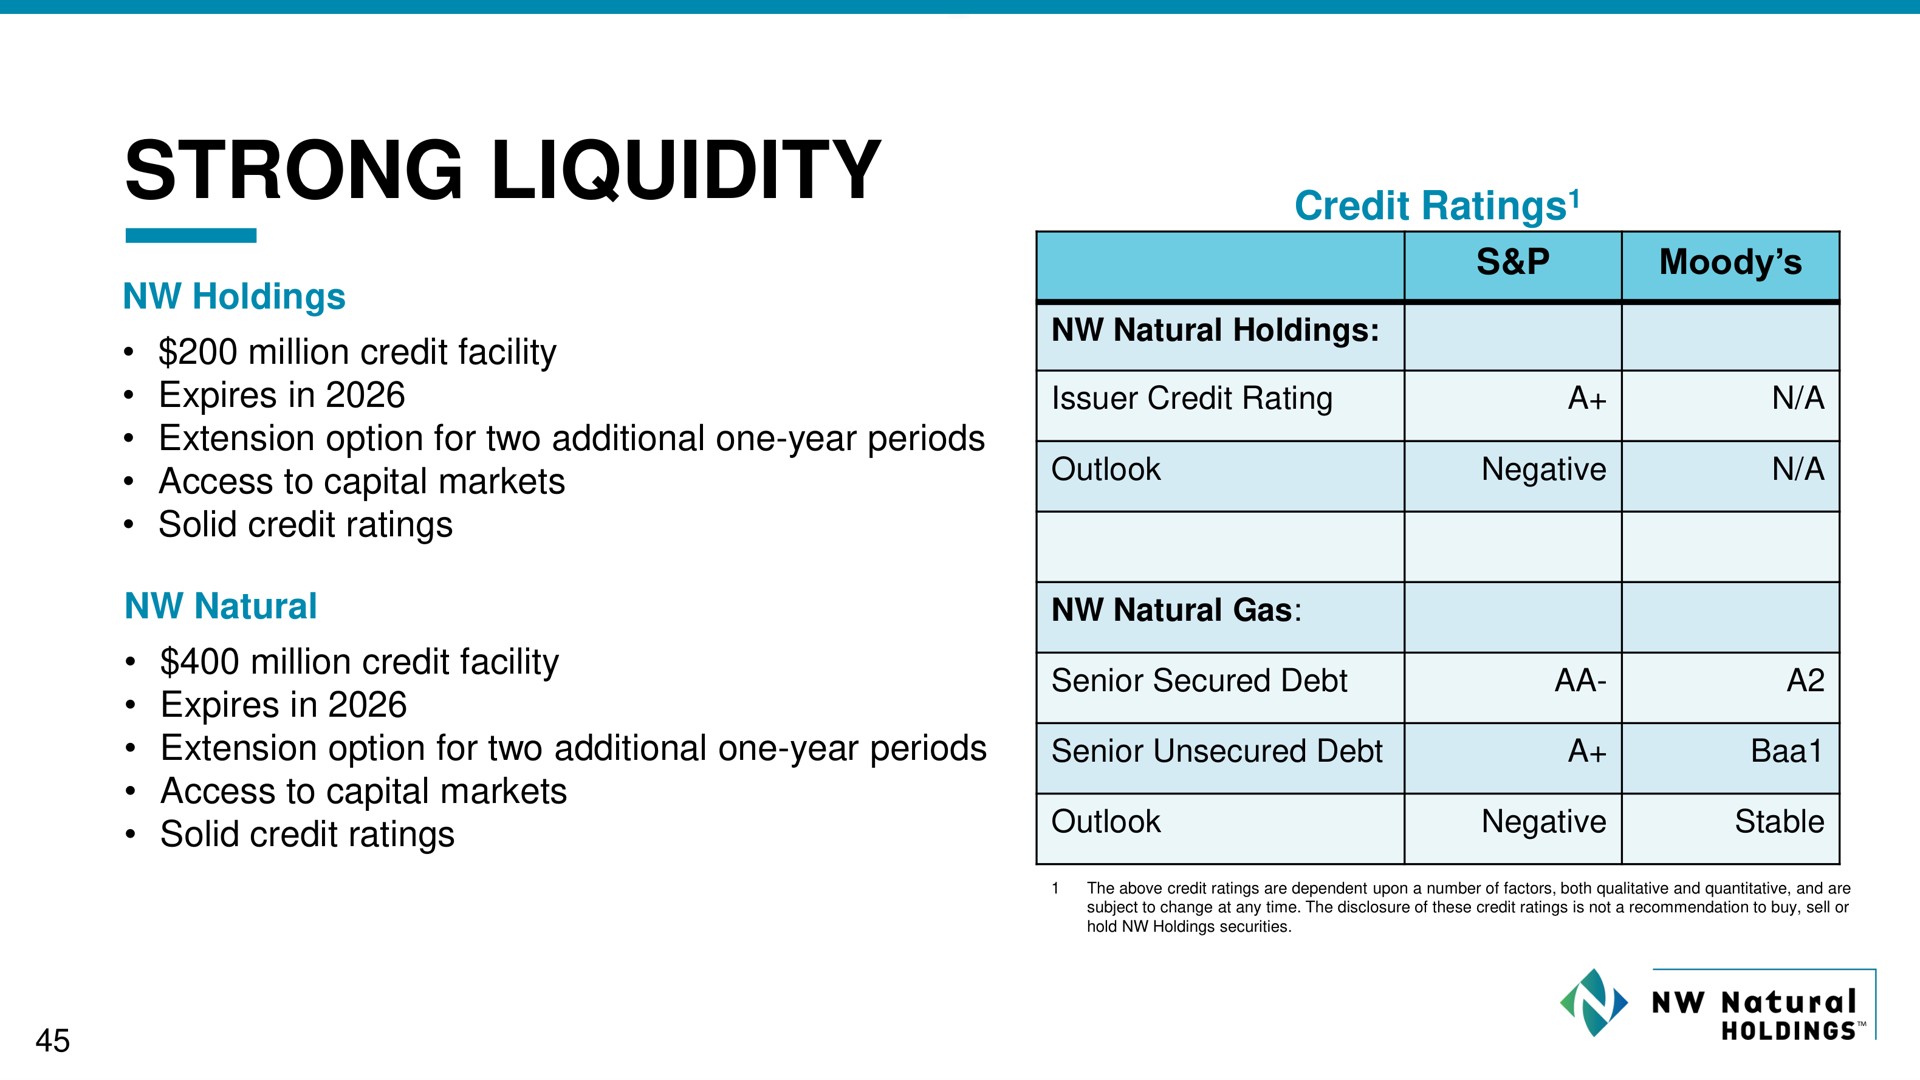 strong liquidity ratings | NW Natural Holdings